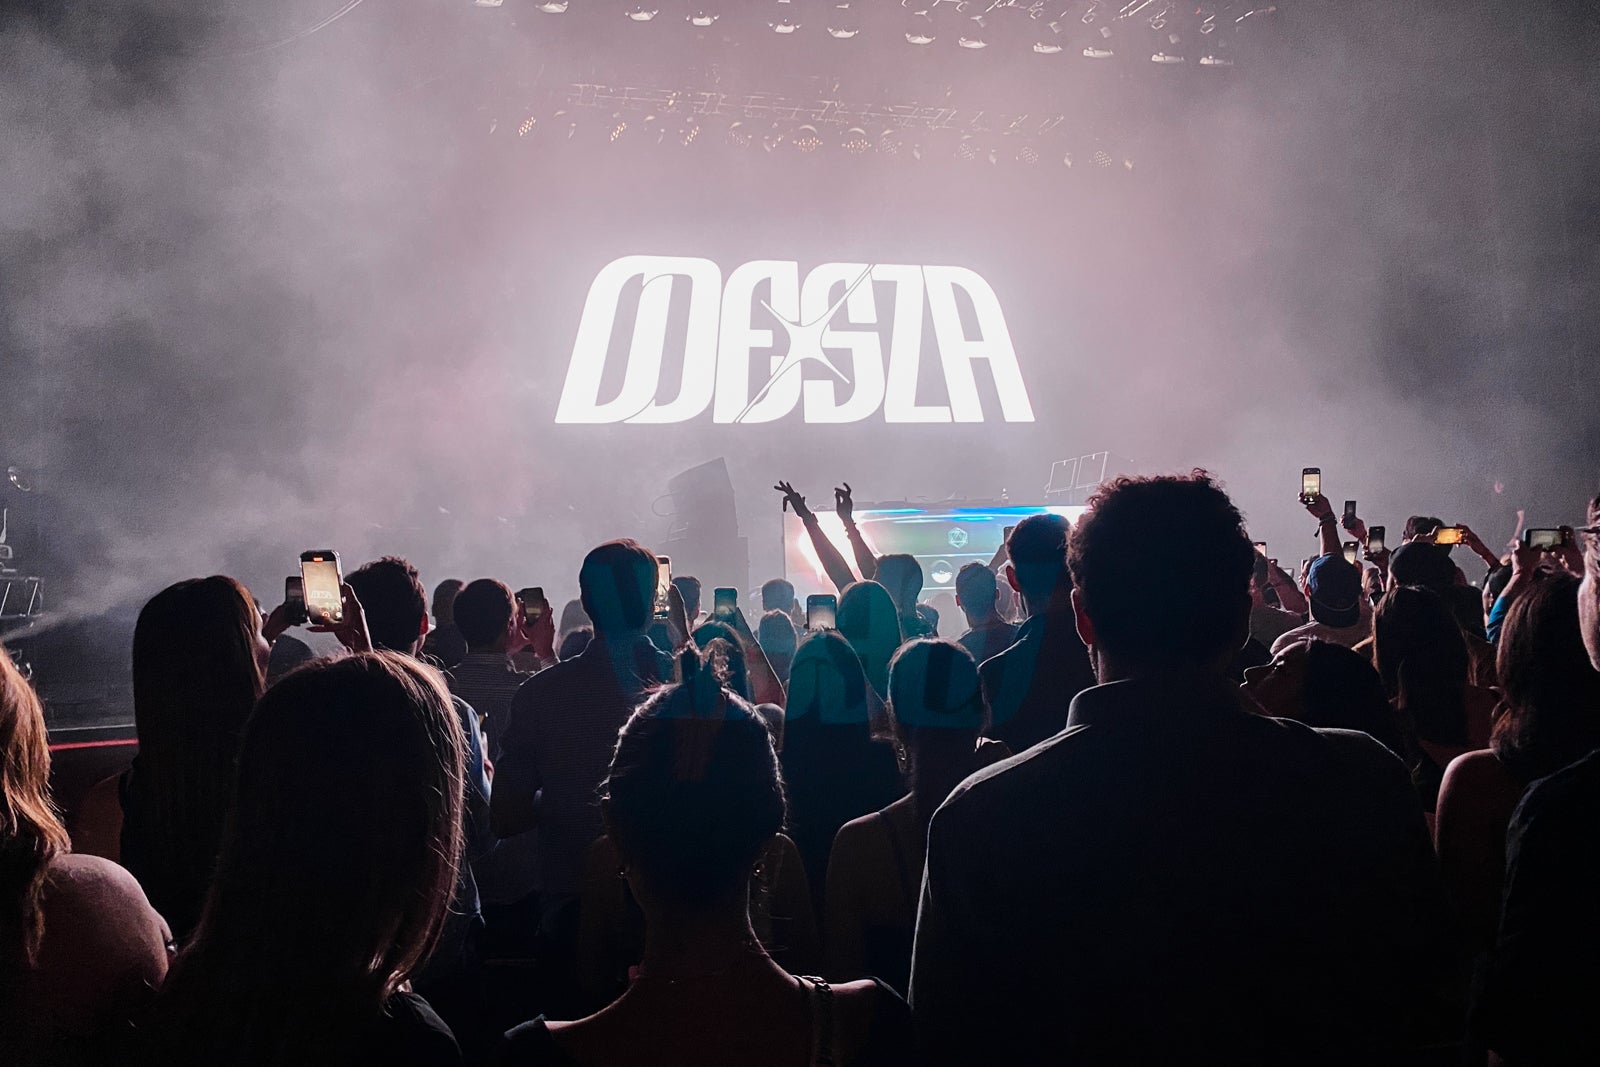 The Odesza concert at the Chicago Theater